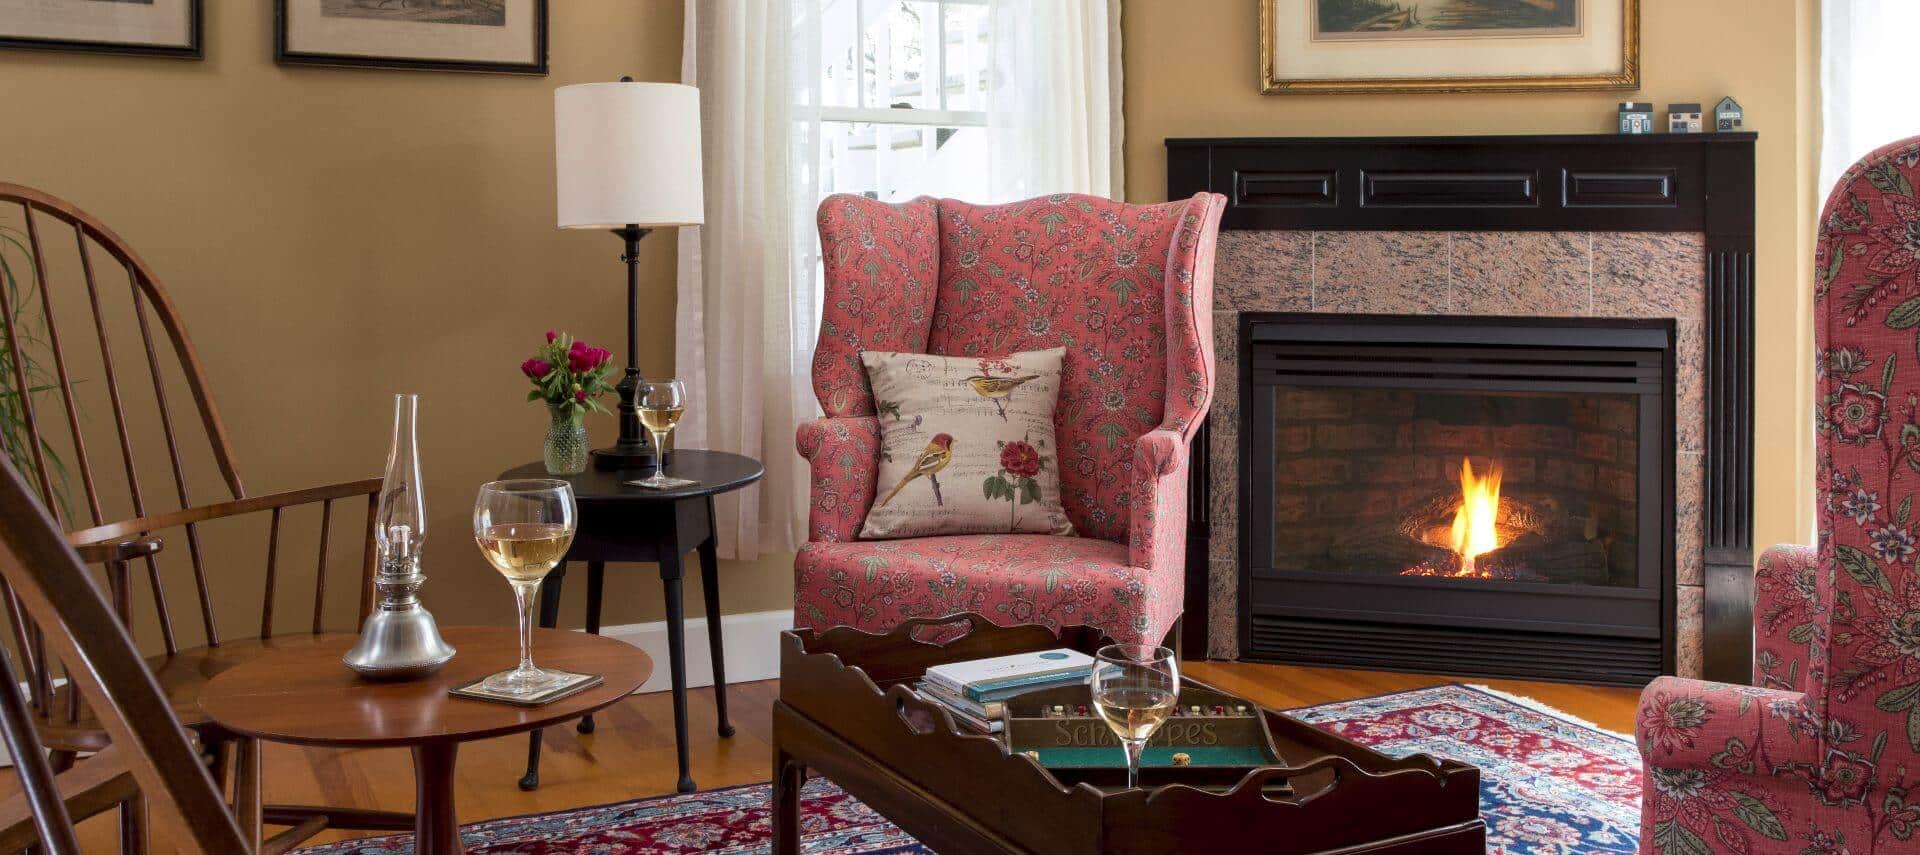 Sitting room area with rose wingback chairs and a fireplace.